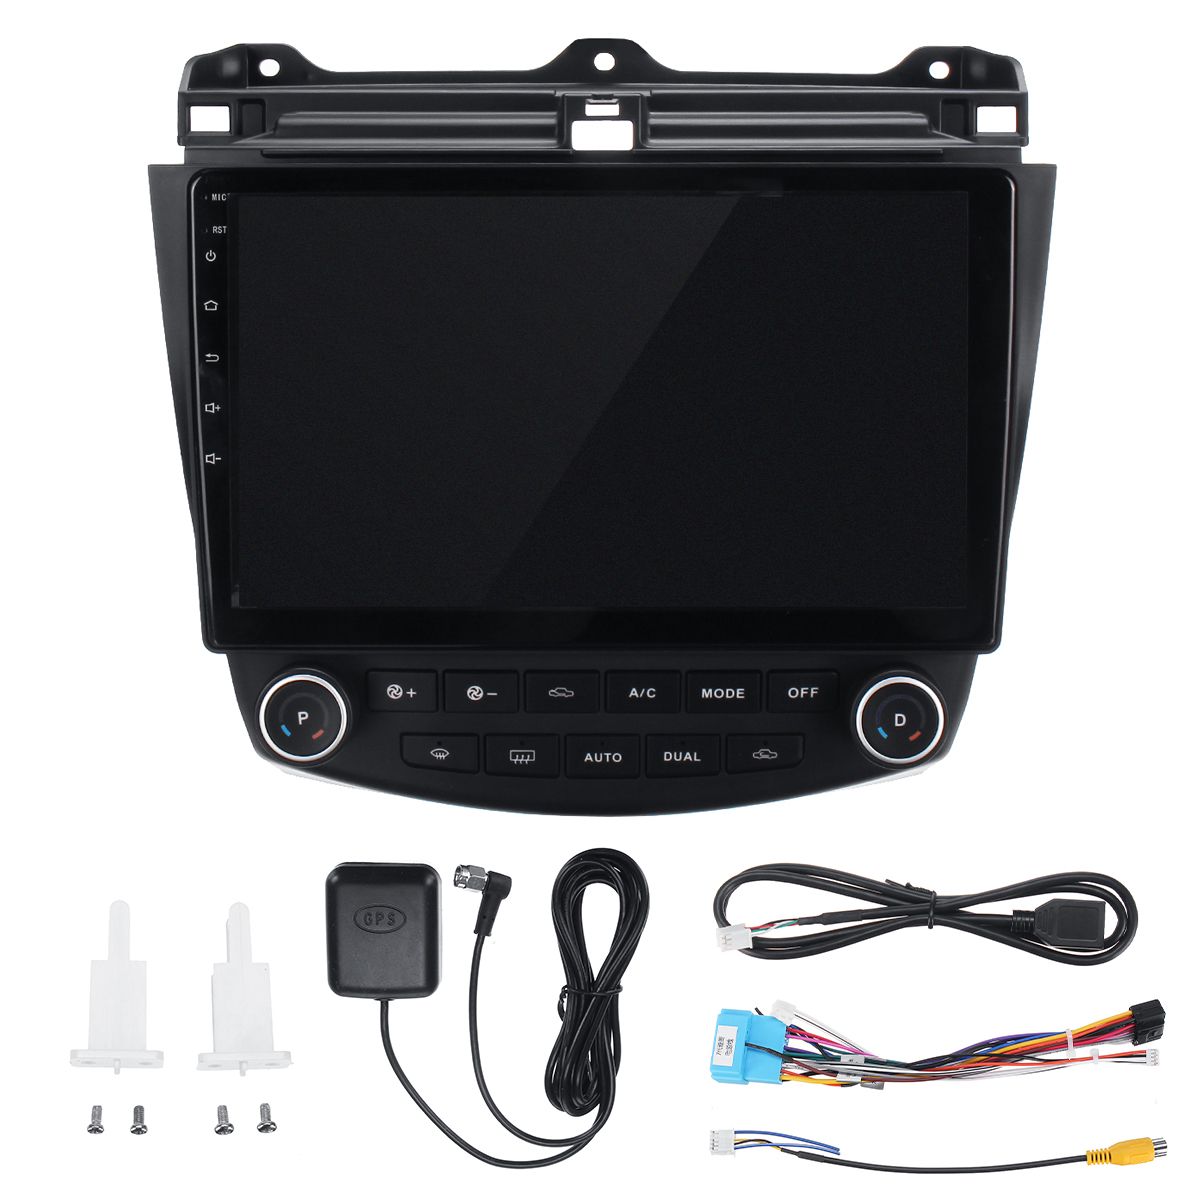 YUEHOO-101-Inch-2-DIN-for-Android-80-Car-Stereo-232G-Quad-Core-MP5-Player-GPS-WIFI-4G-AM-RDS-Radio-f-1564866